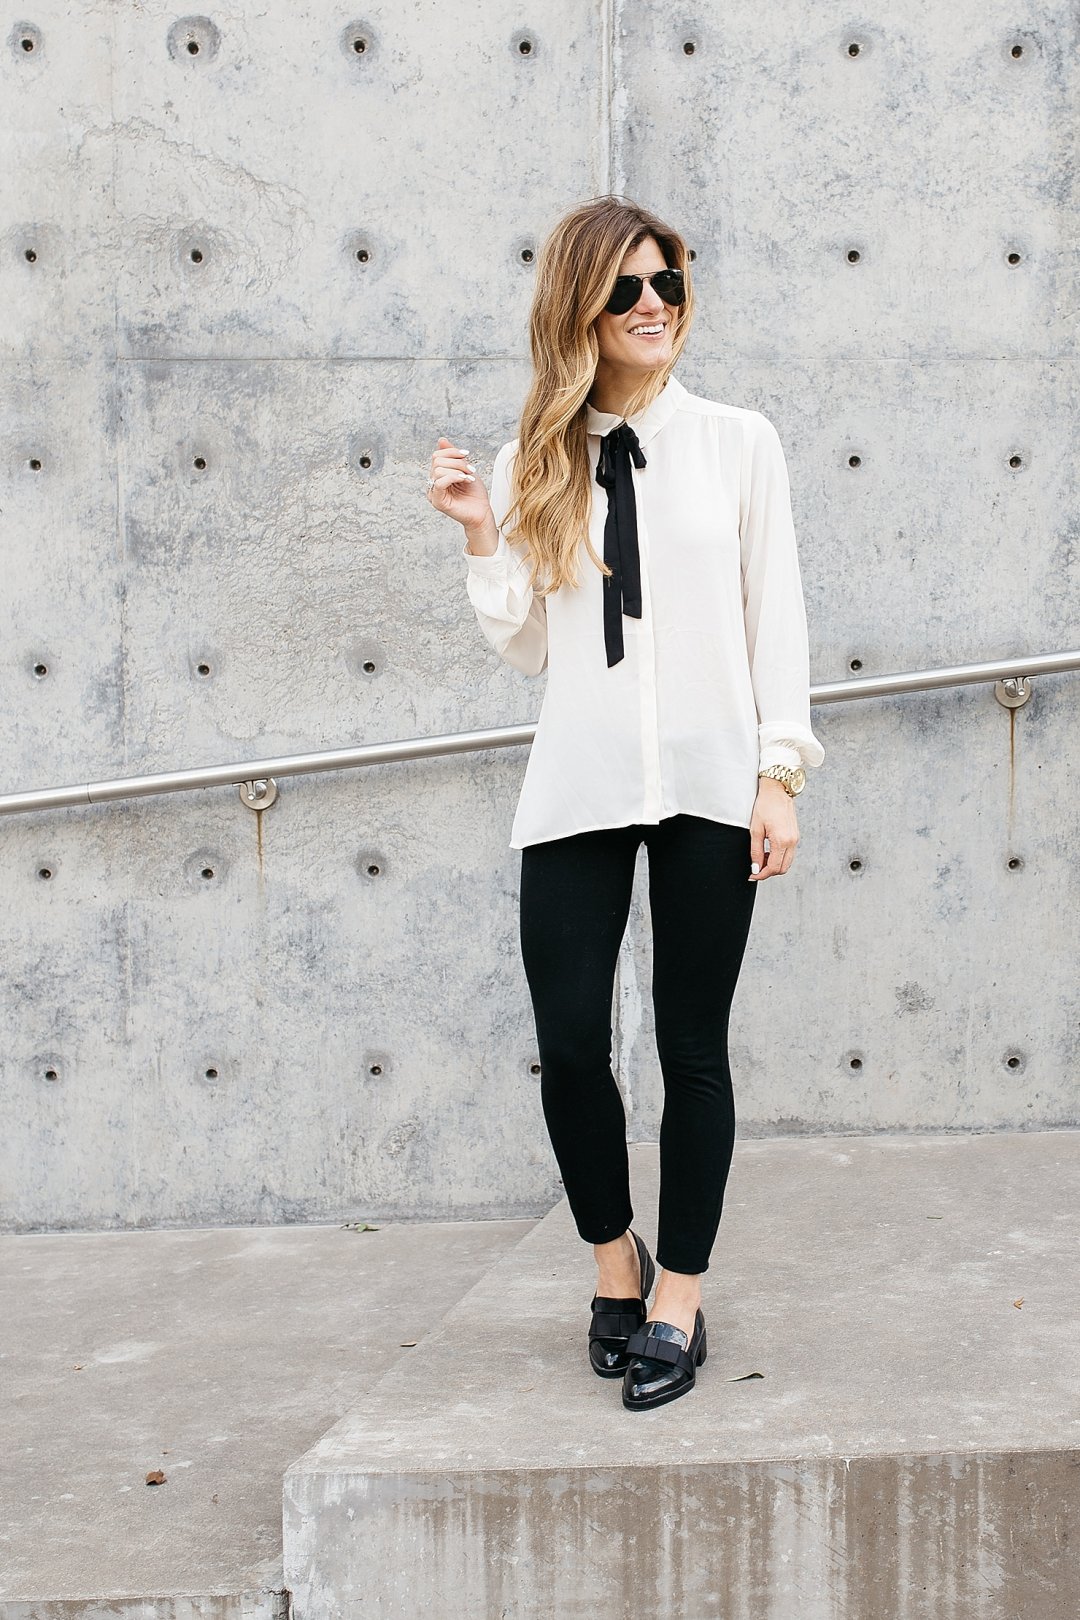 White floral blouse gray pants business casual with black cardigan